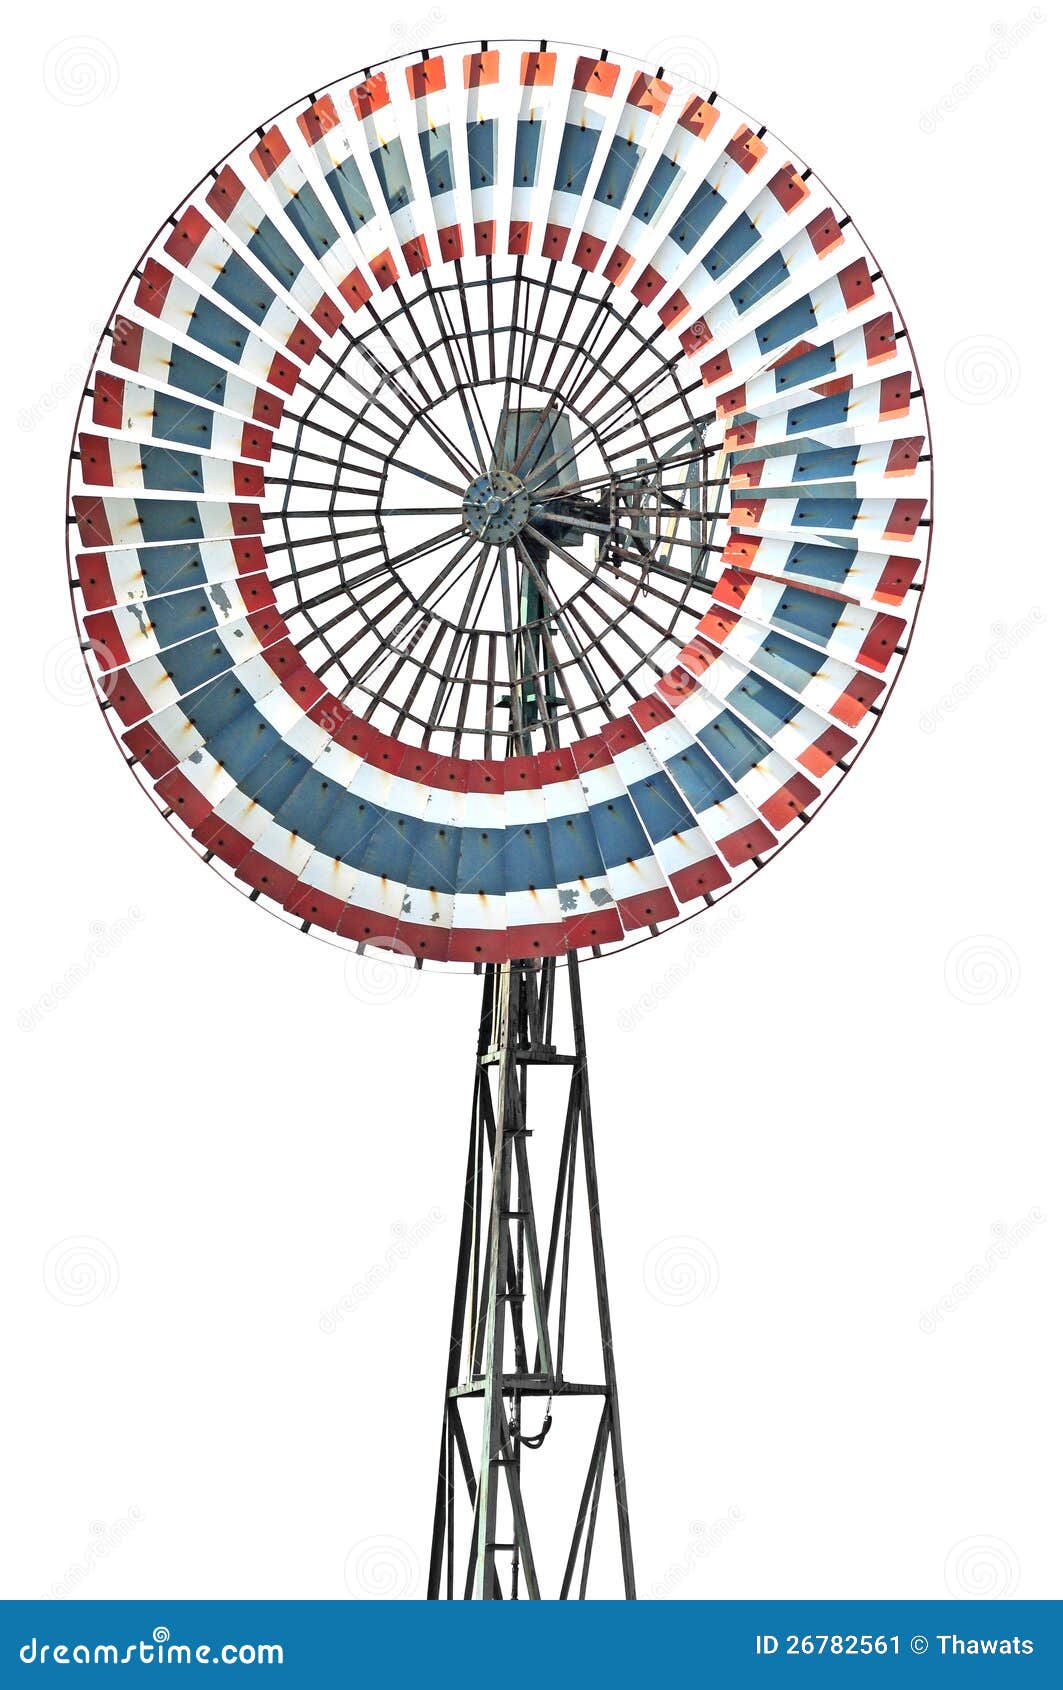 More similar stock images of ` Retro Windmill `